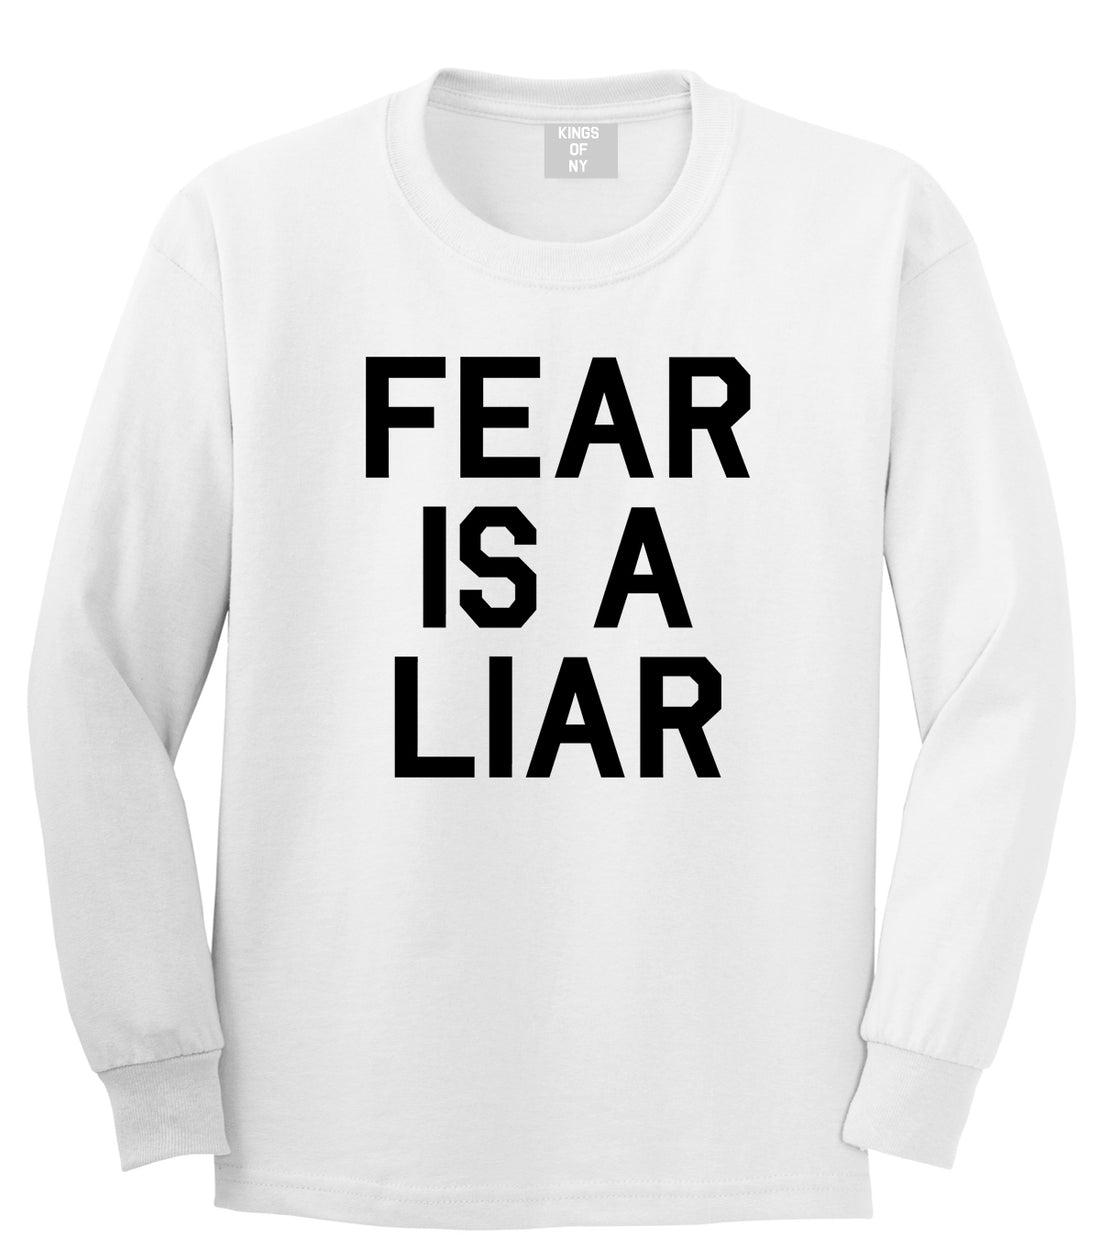 Fear Is A Liar Motivational Mens Long Sleeve T-Shirt White by Kings Of NY